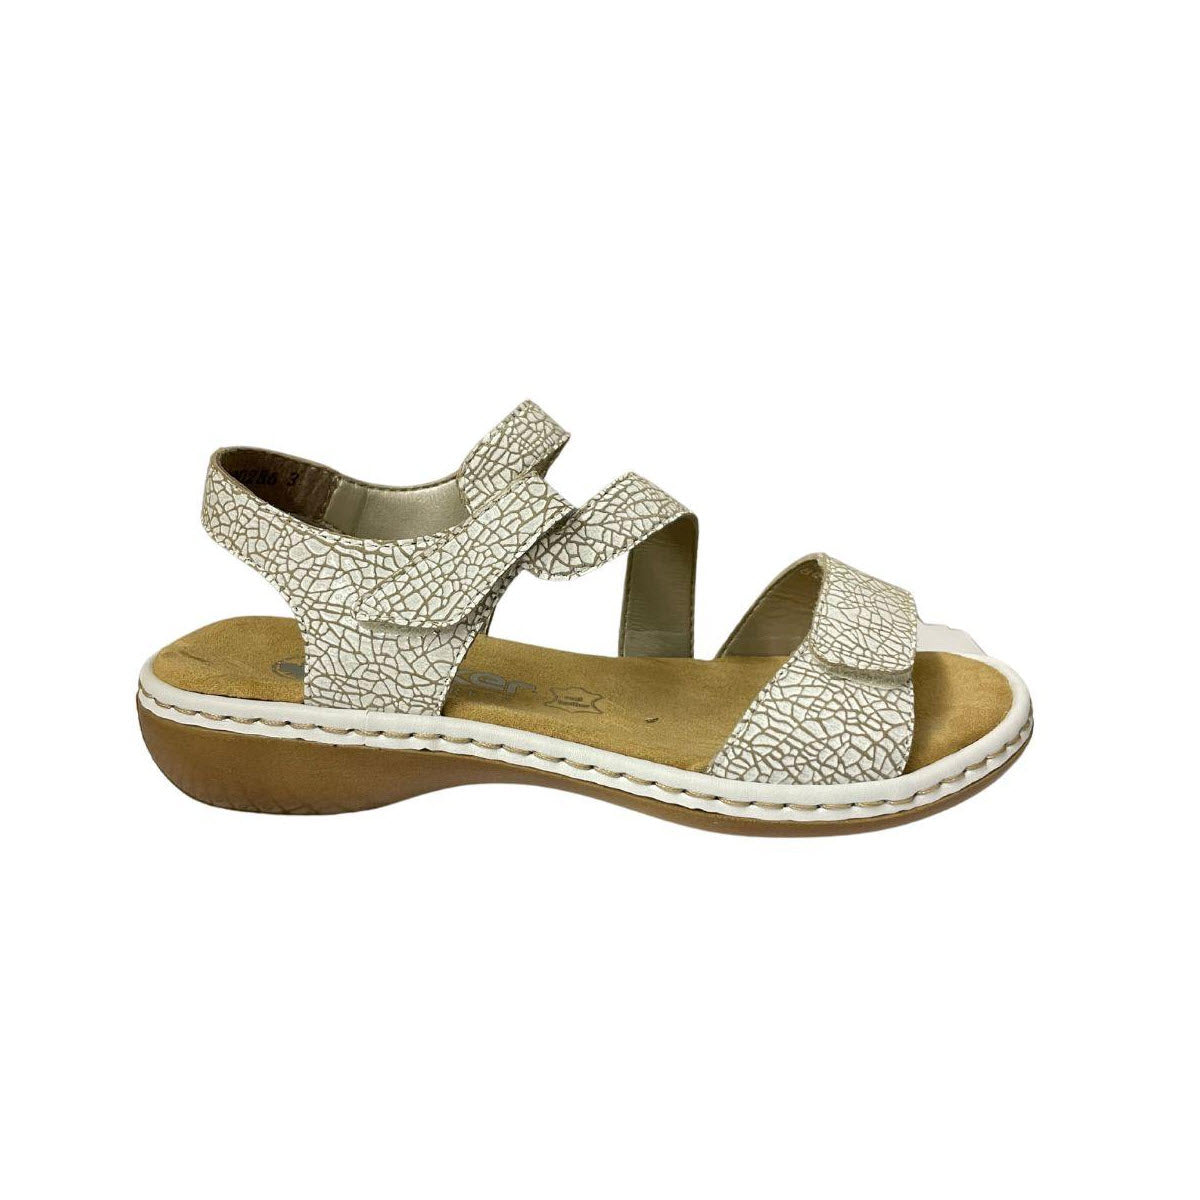 Leather sandals featuring a gold crackle pattern with double straps and hook-and-loop adjustability, set on a cork sole, isolated on a white background - RIEKER COMFORT Z STRAP WHITE CRACKLE WOMENS by Rieker